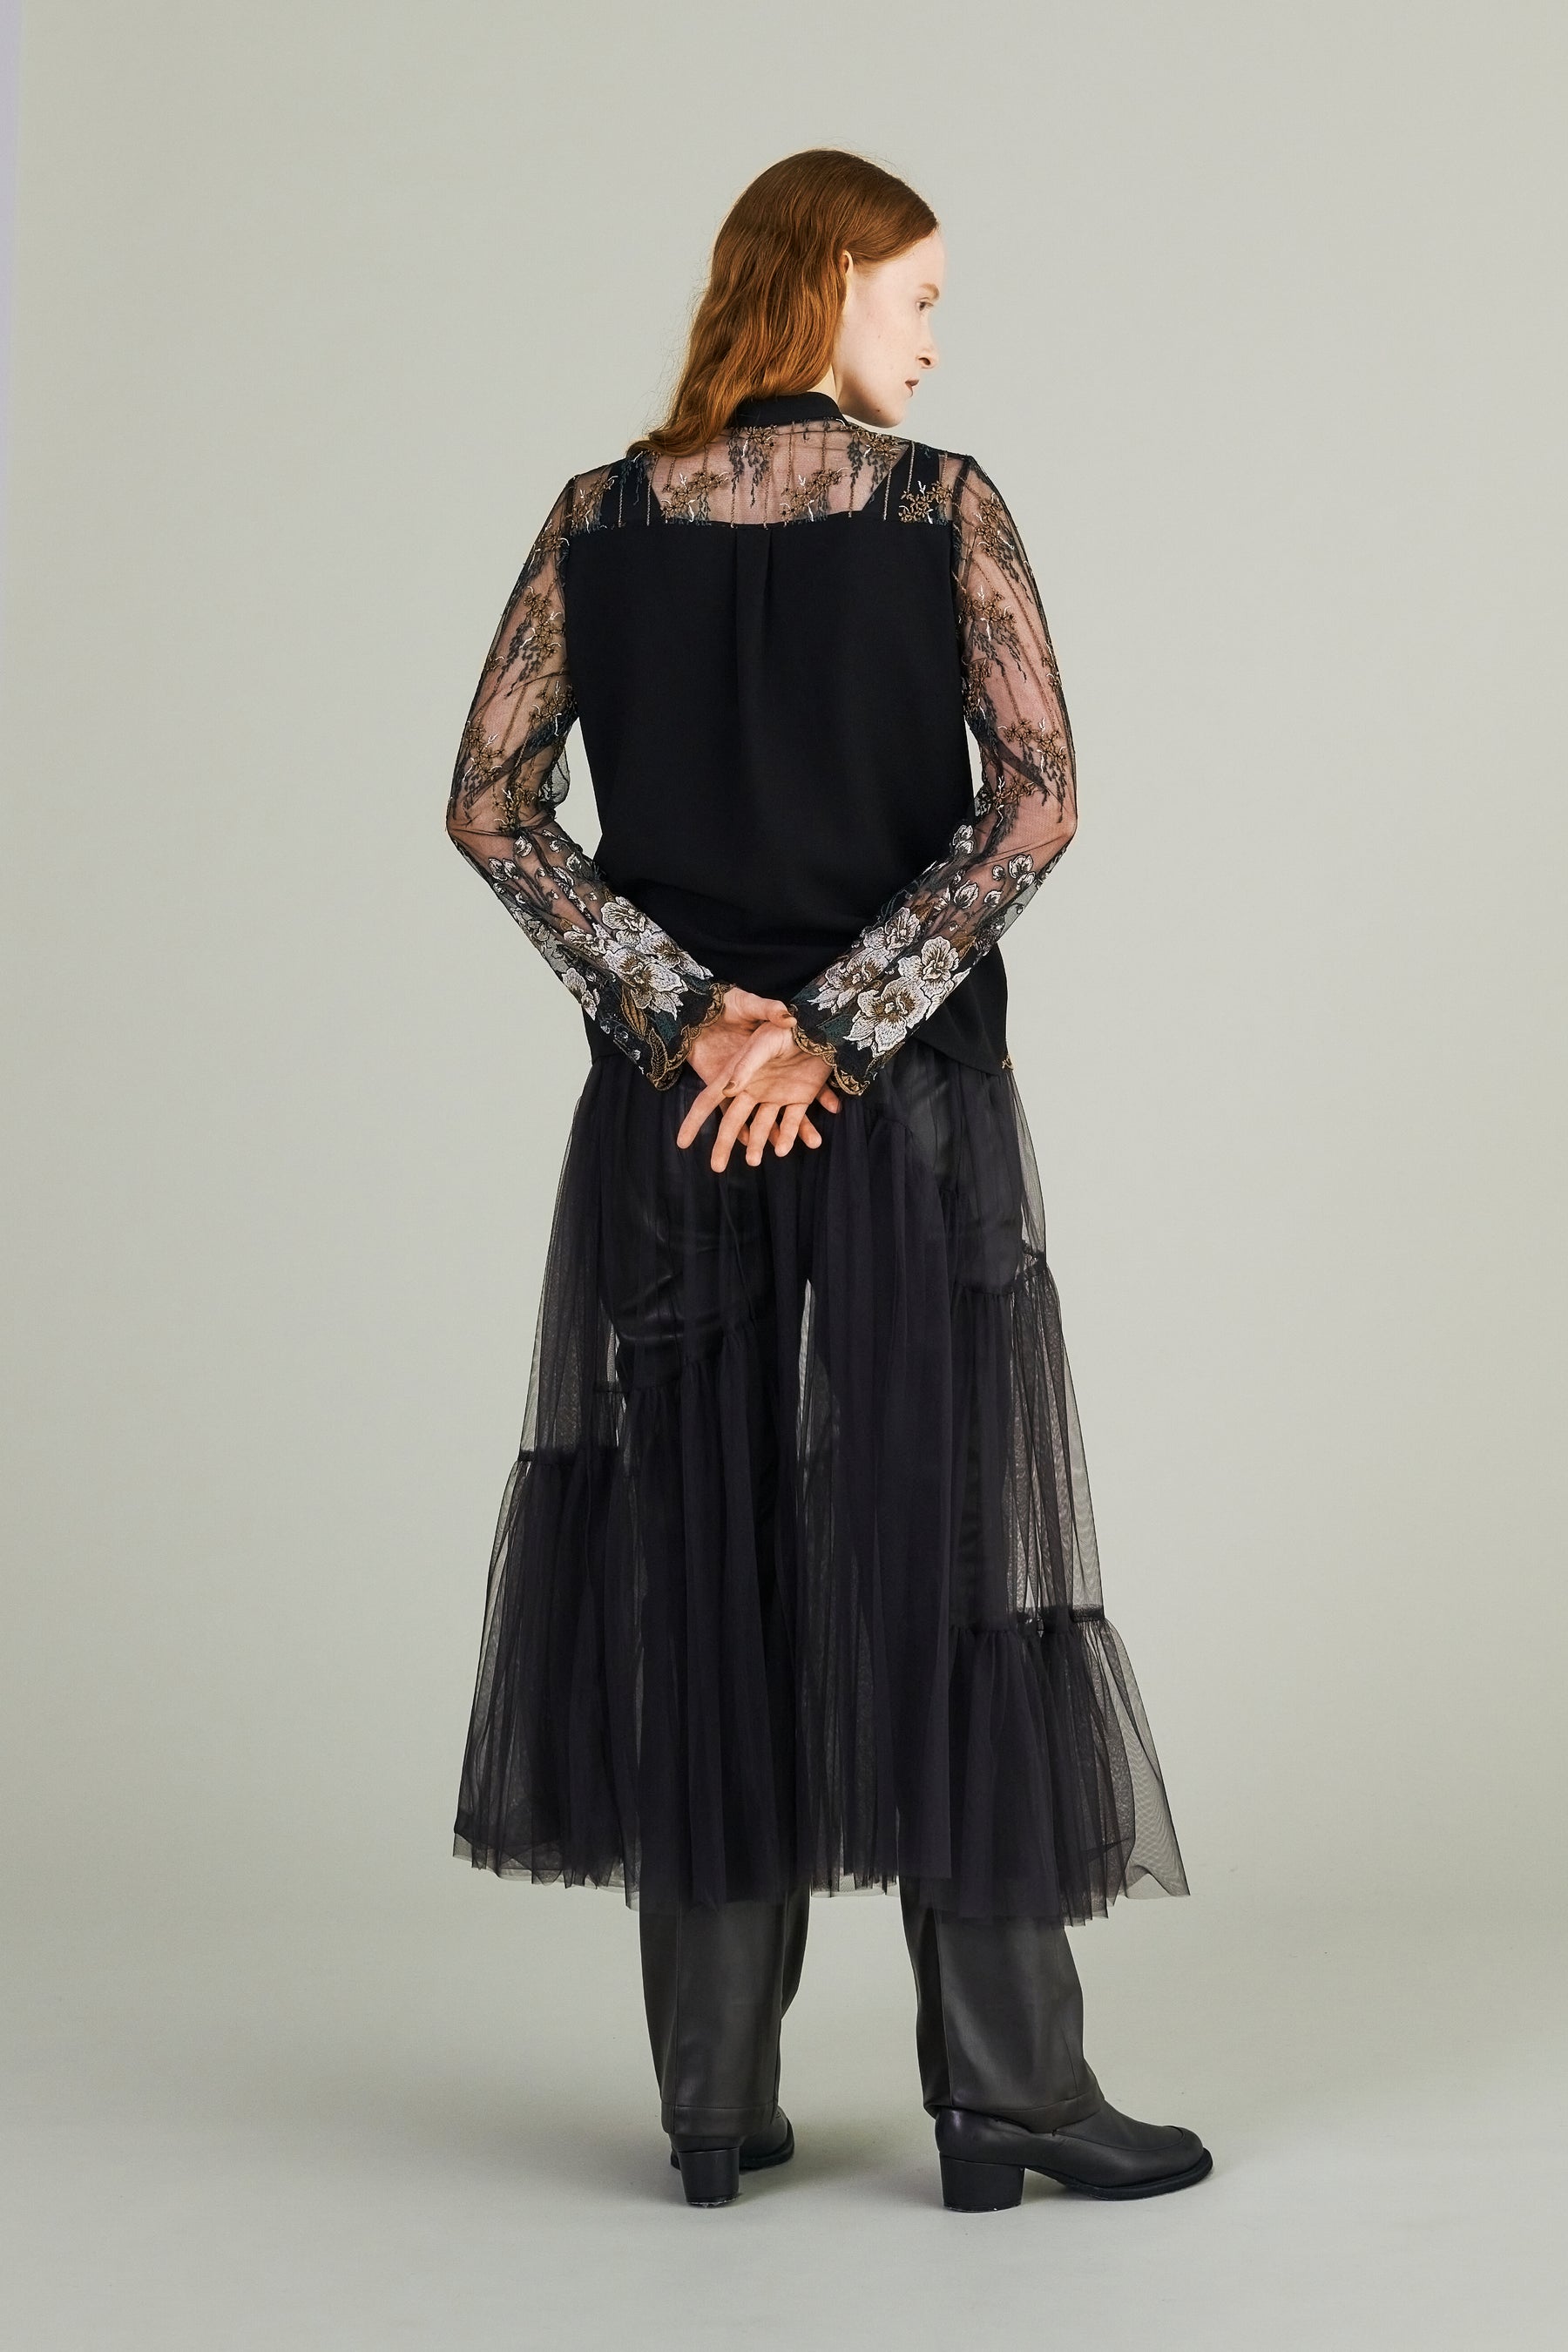 Everlasting embroidery lace blouse (Black)